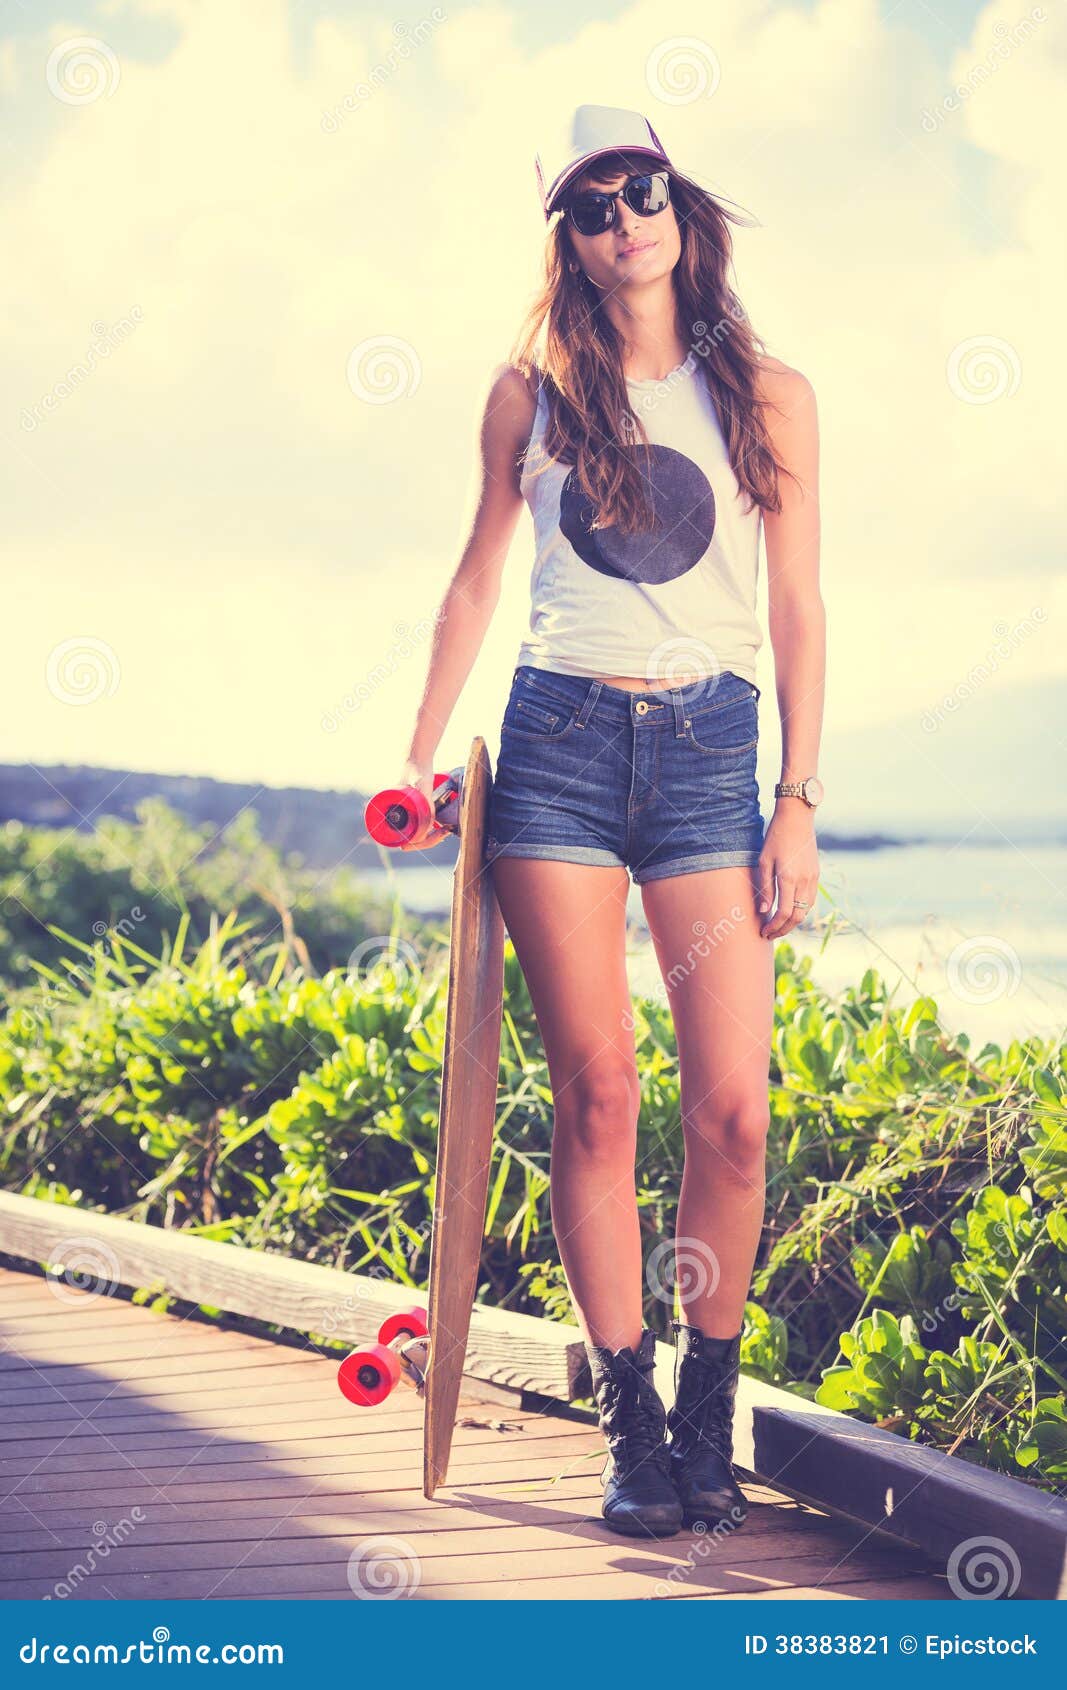 Hipster Girl With Skate Board Wearing Sunglasses Stock 